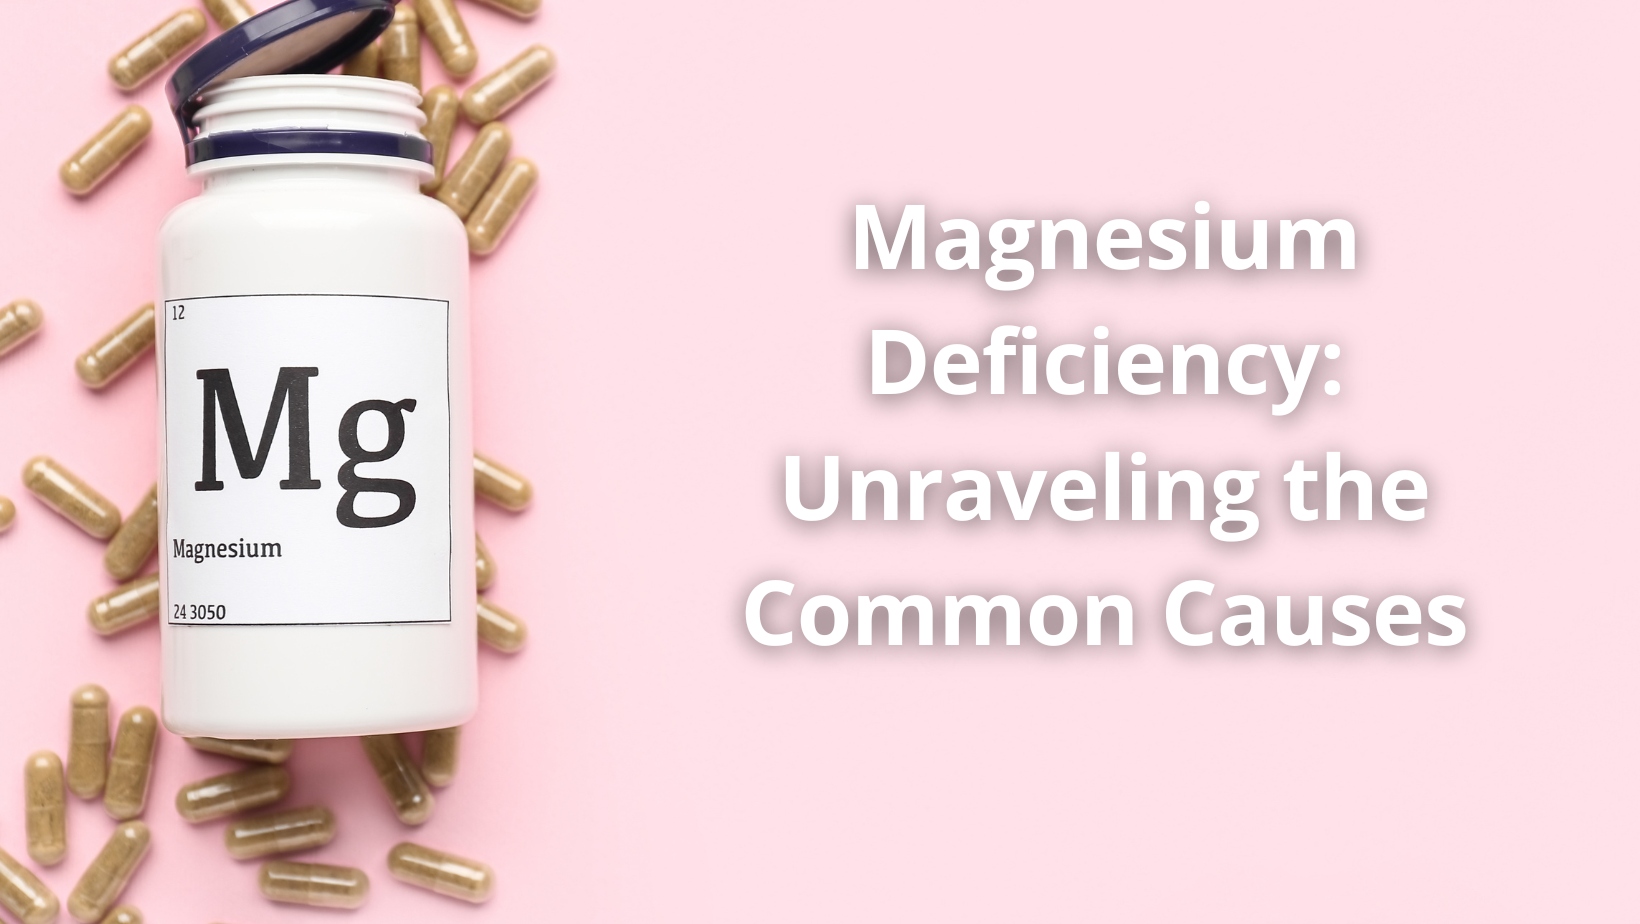 Magnesium Deficiency: Unraveling the Common Causes